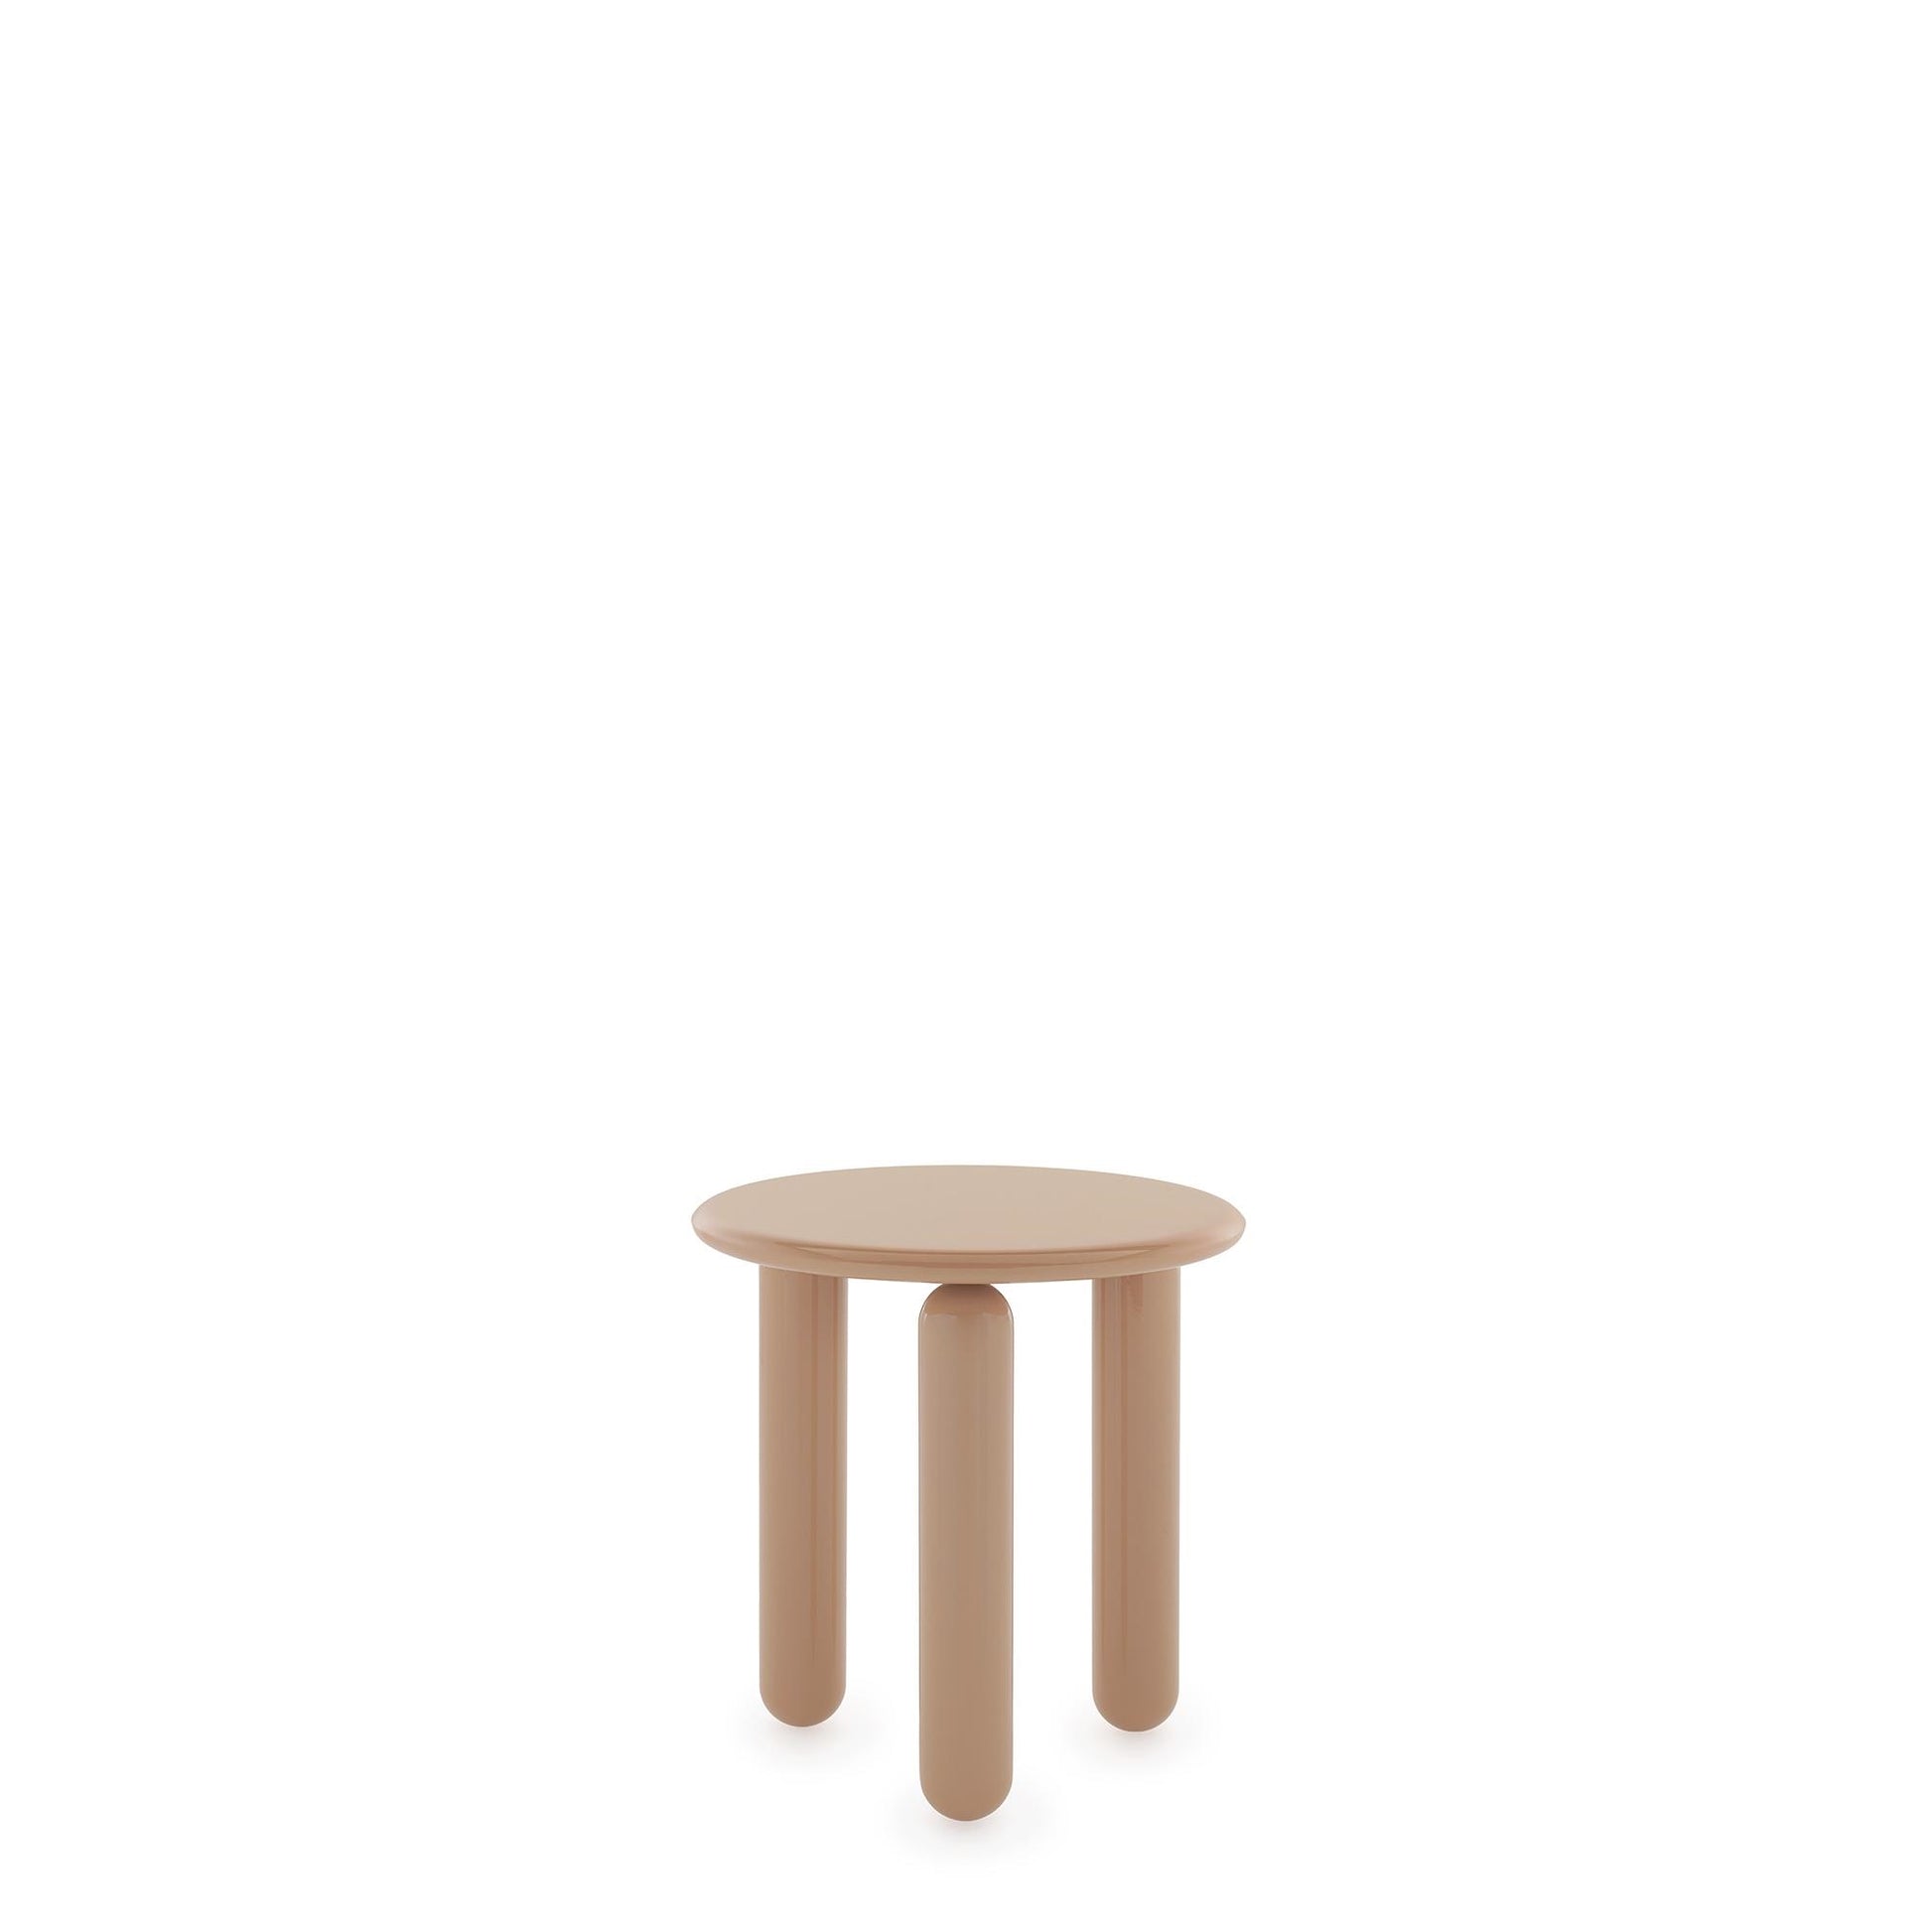 Undique Mas Side Table 48x51 by Kartell #Pink